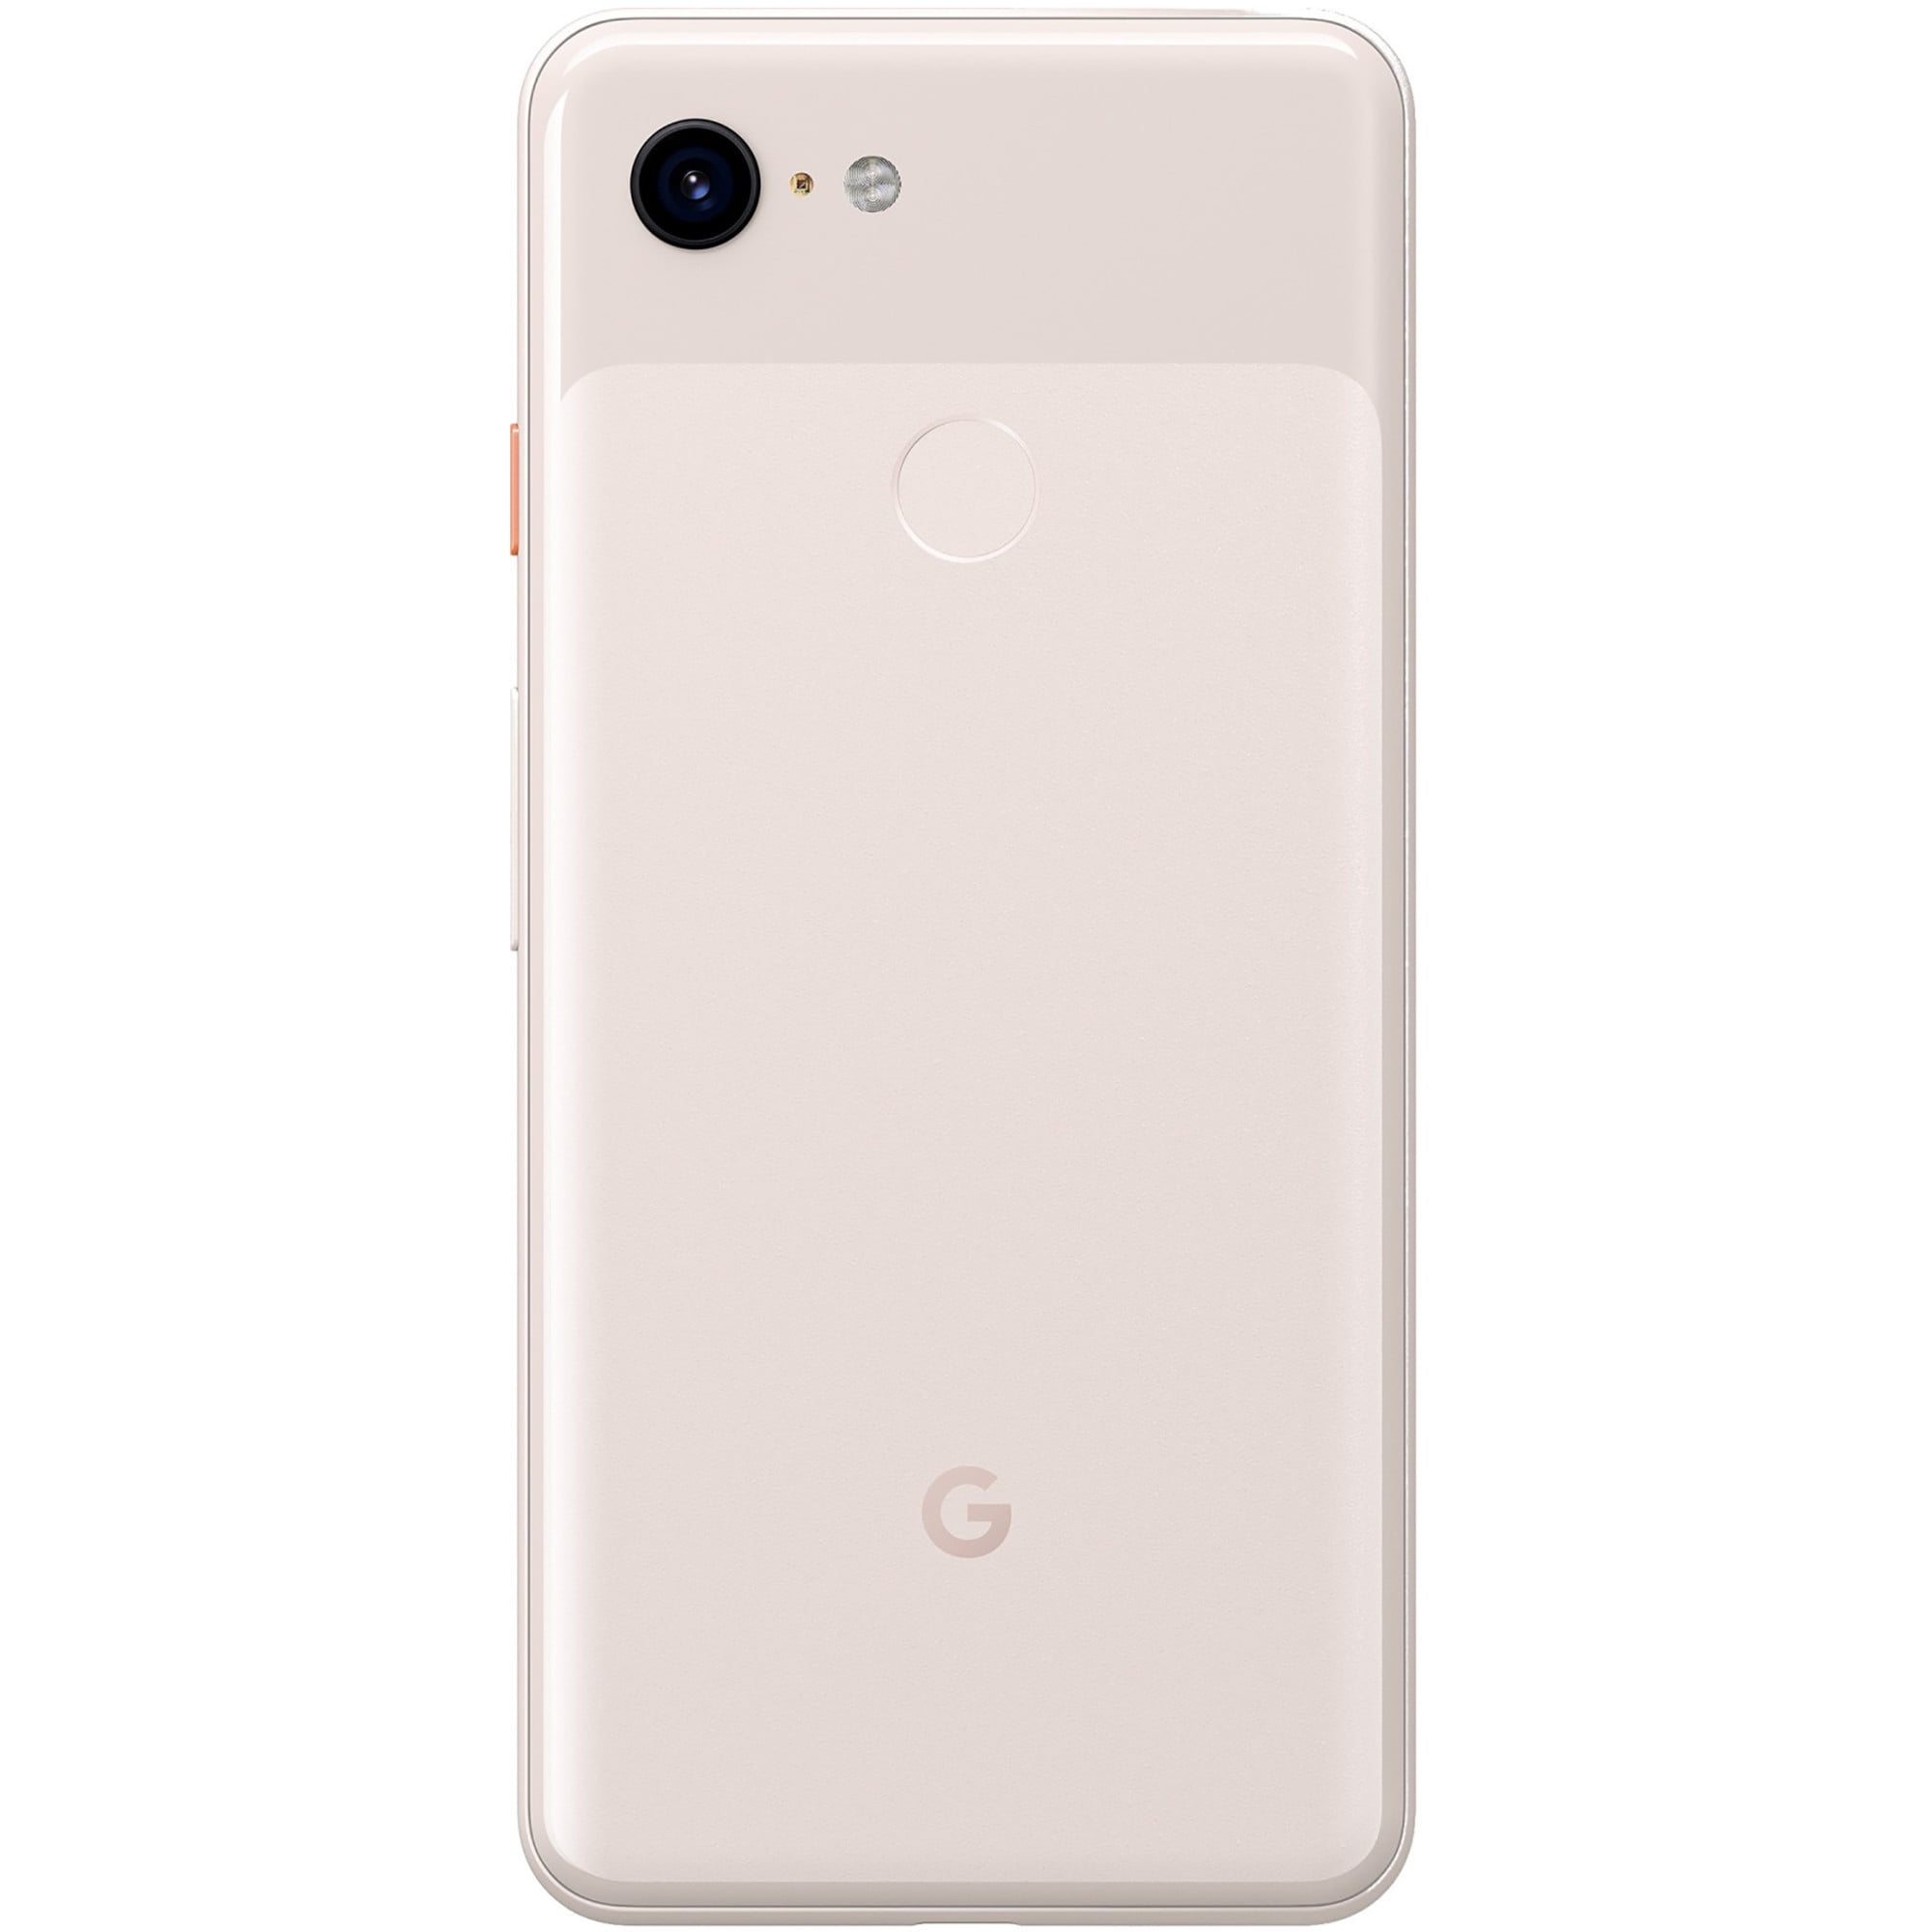 Restored Google Pixel 3 64GB Unlocked GSM 4G LTE Android Phone w/ 12.2MP  Rear & Dual 8MP Front Camera - Not Pink (Refurbished)